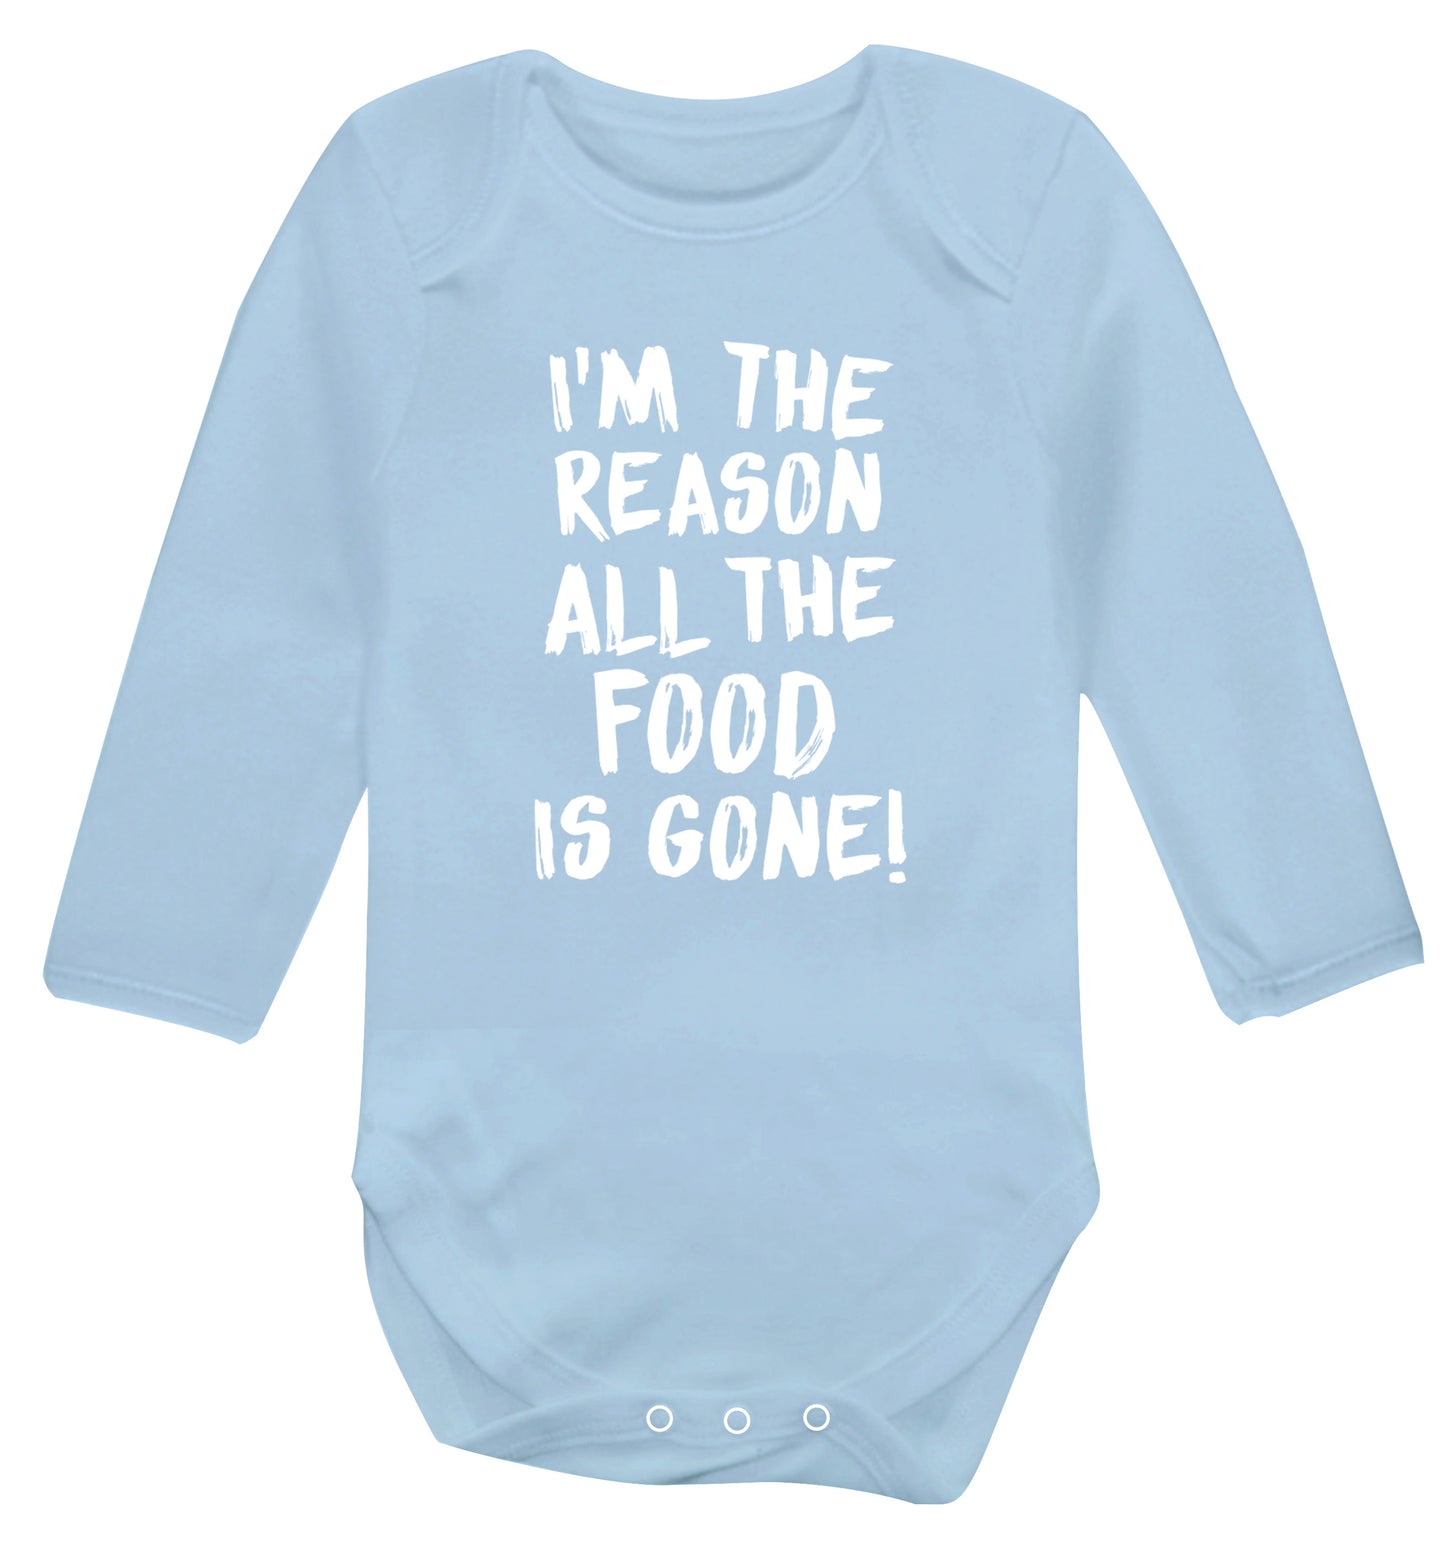 I'm the reason why all the food is gone Baby Vest long sleeved pale blue 6-12 months